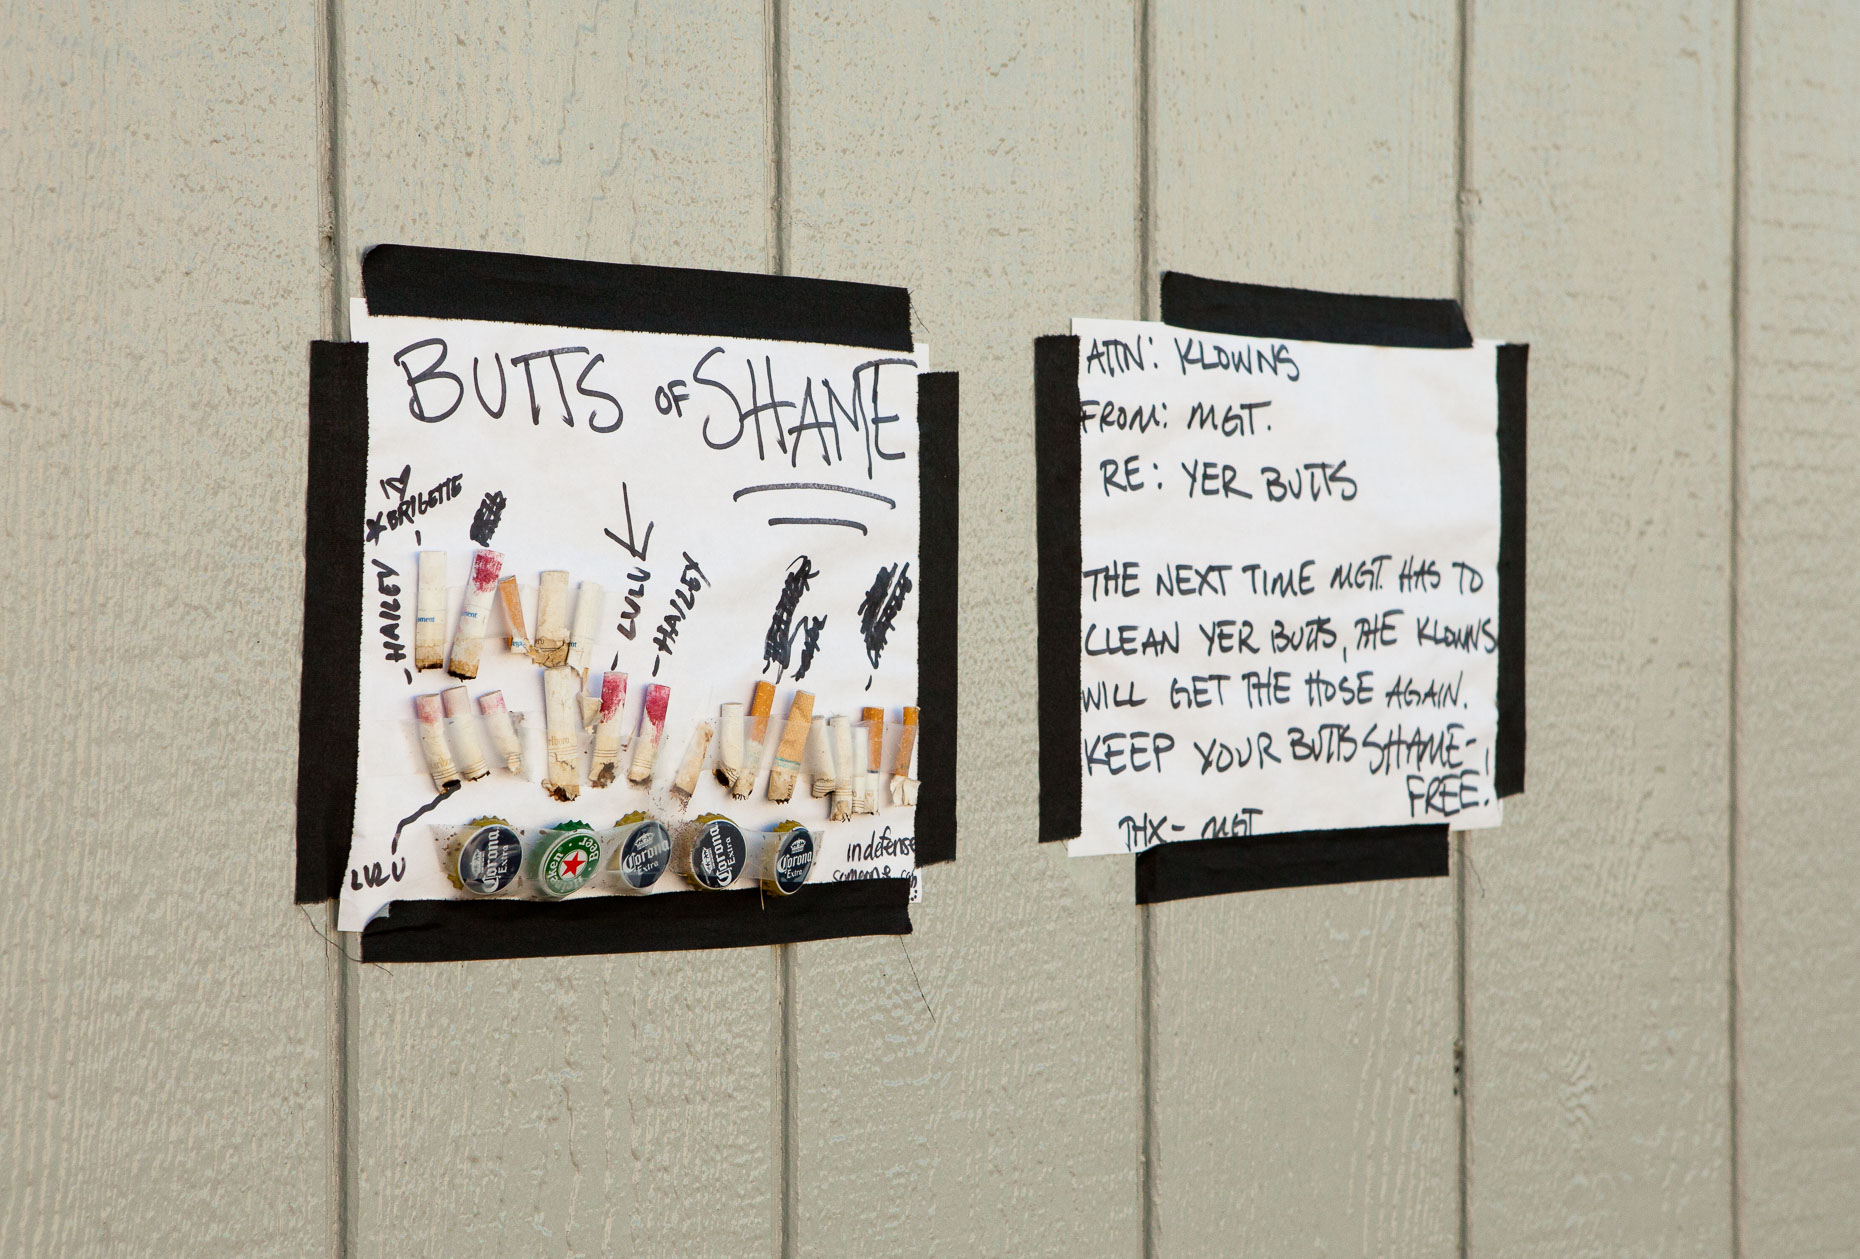 Sign notice about cigarette butts behind the scenes at Cirque Berzerk circus performers, by David Zaitz